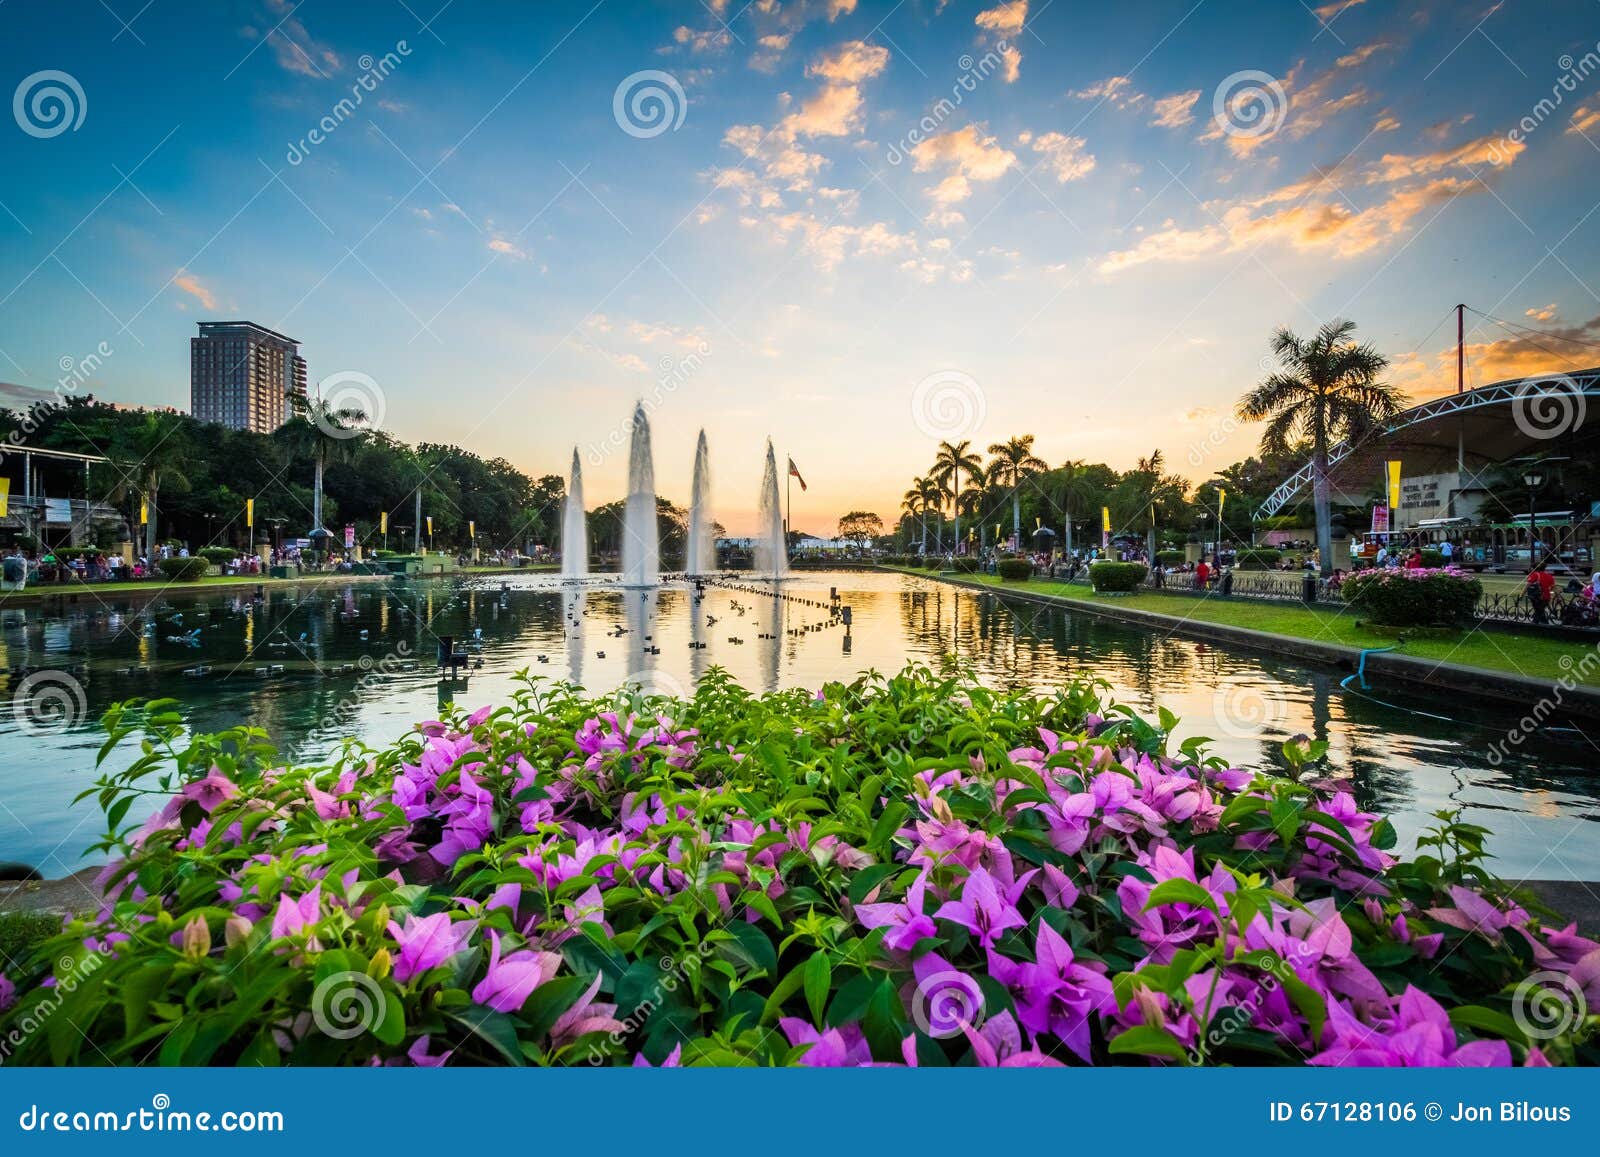 flowers and fountains at sunset at rizal park, in ermita, manila